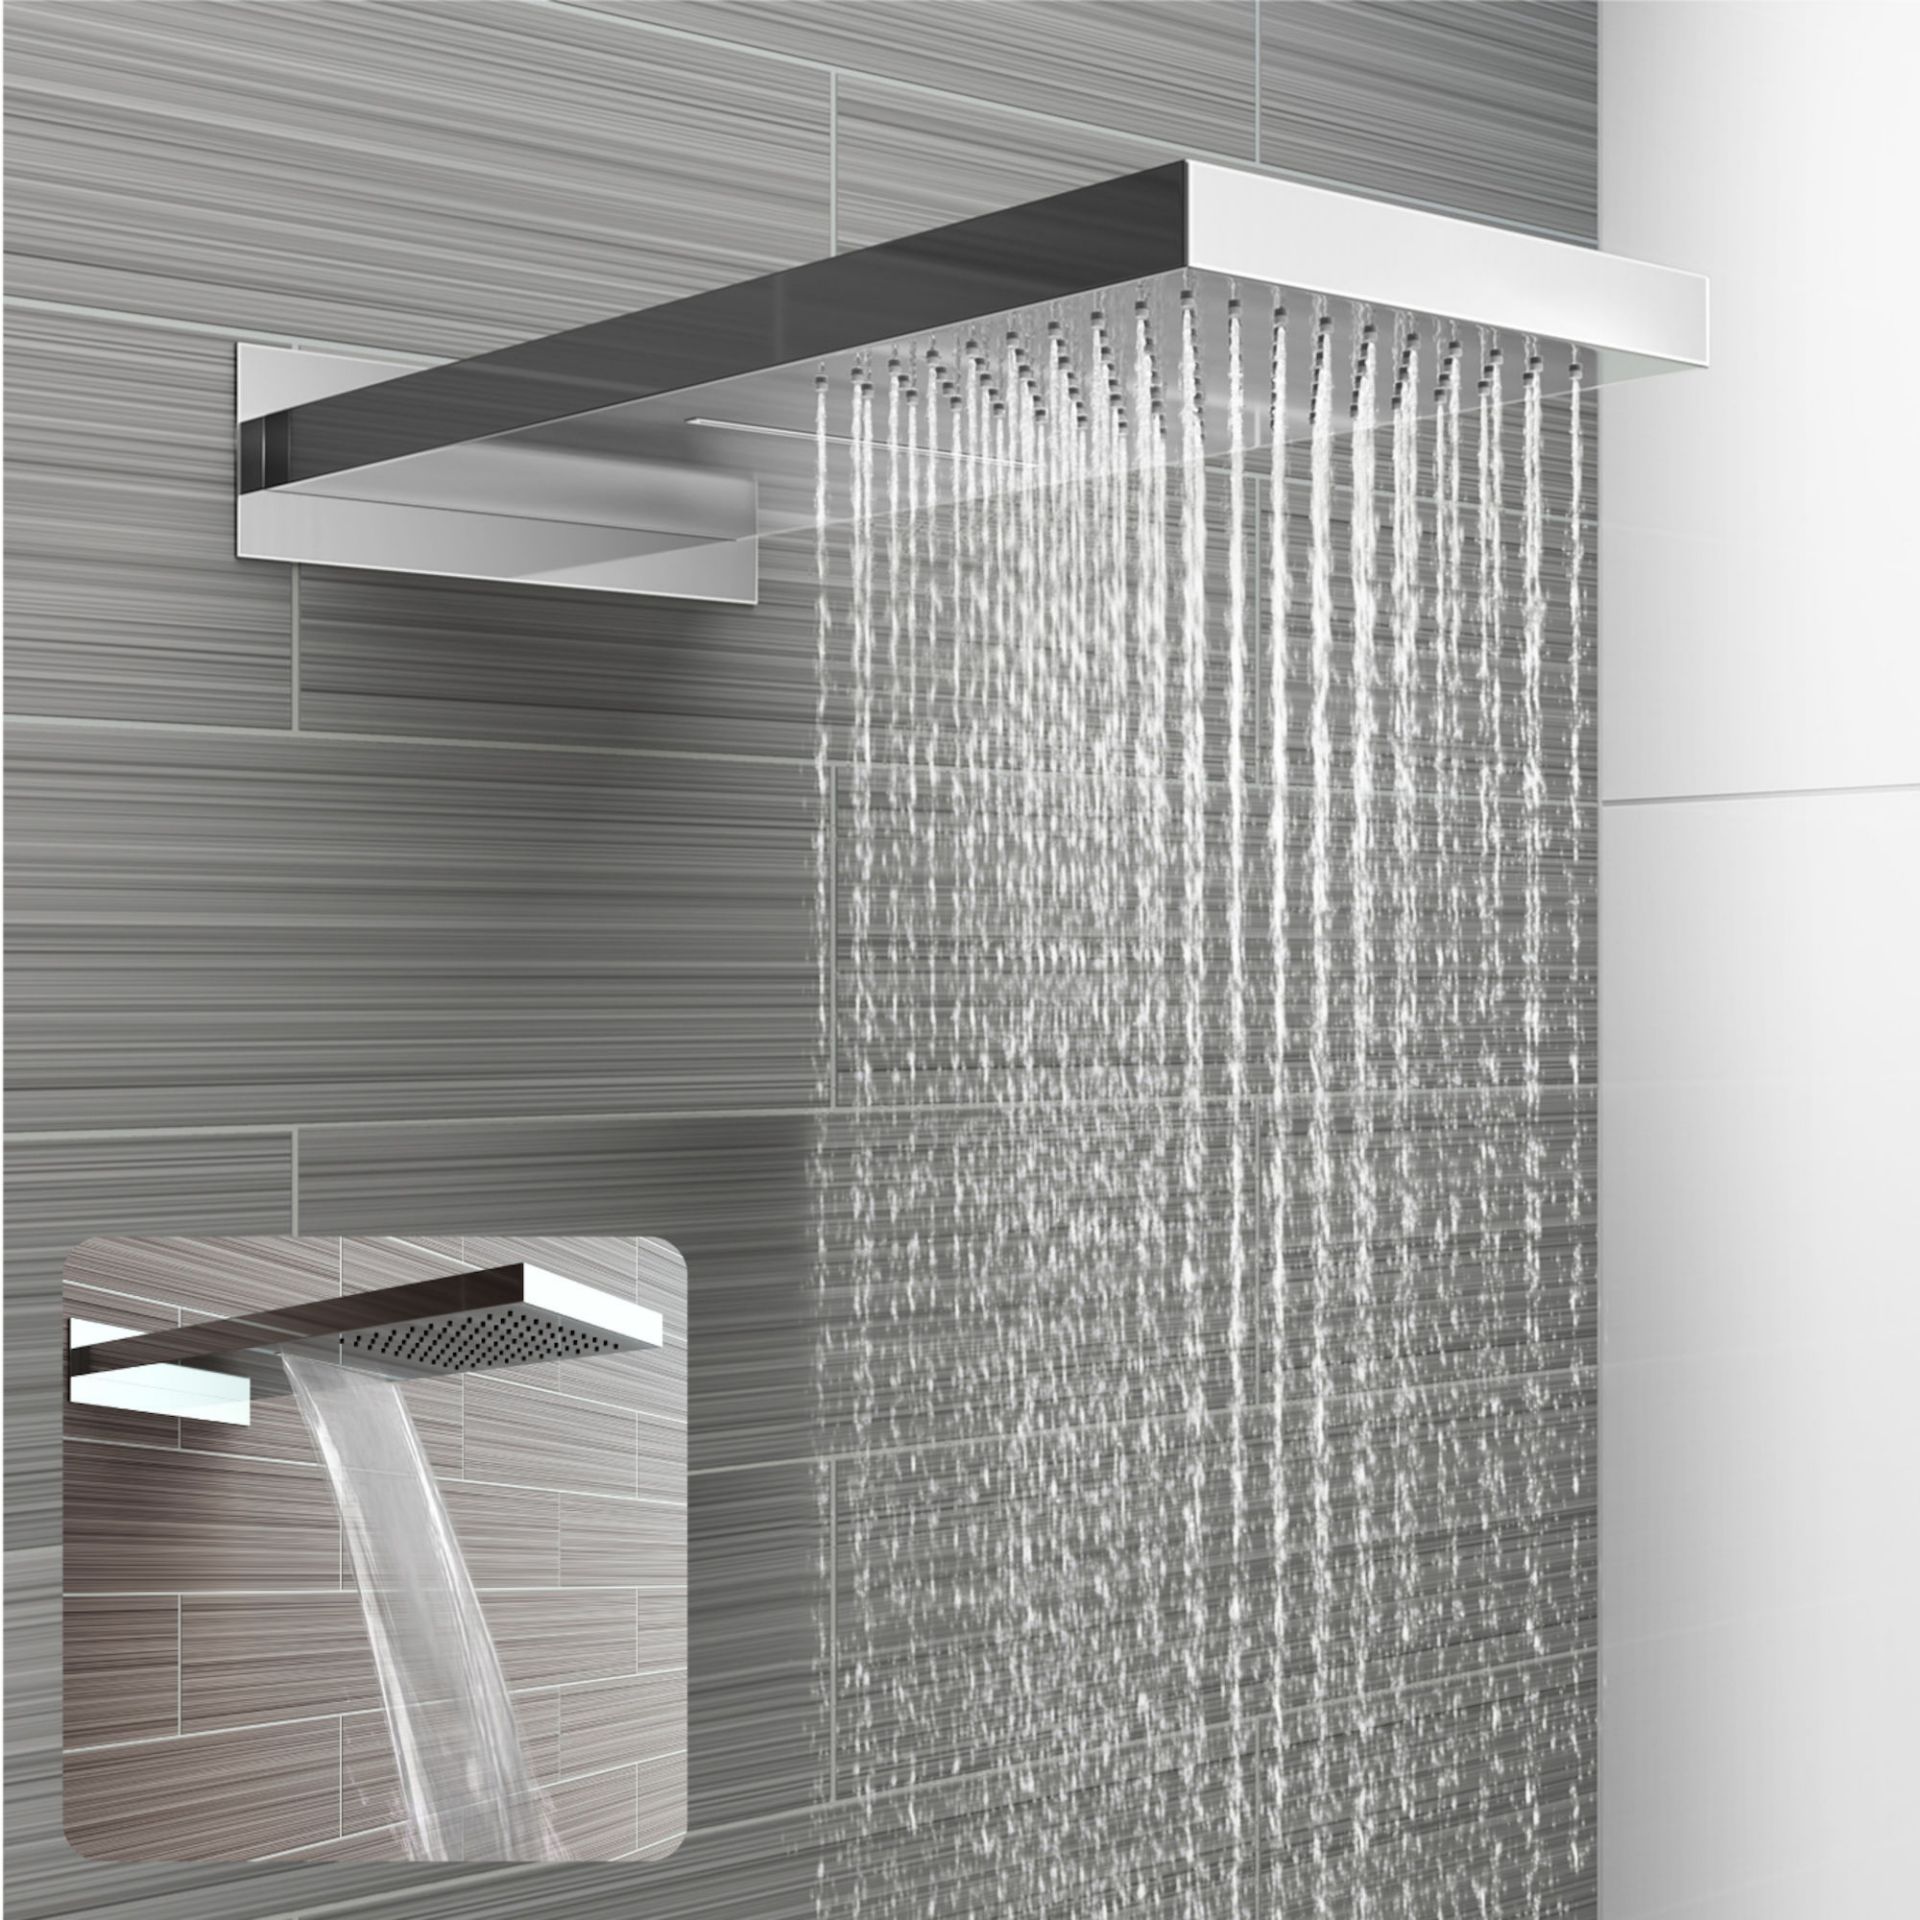 (TY171) 230x500mm Stainless Steel Waterfall Shower Head. RRP £374.99. Dual function waterfall and